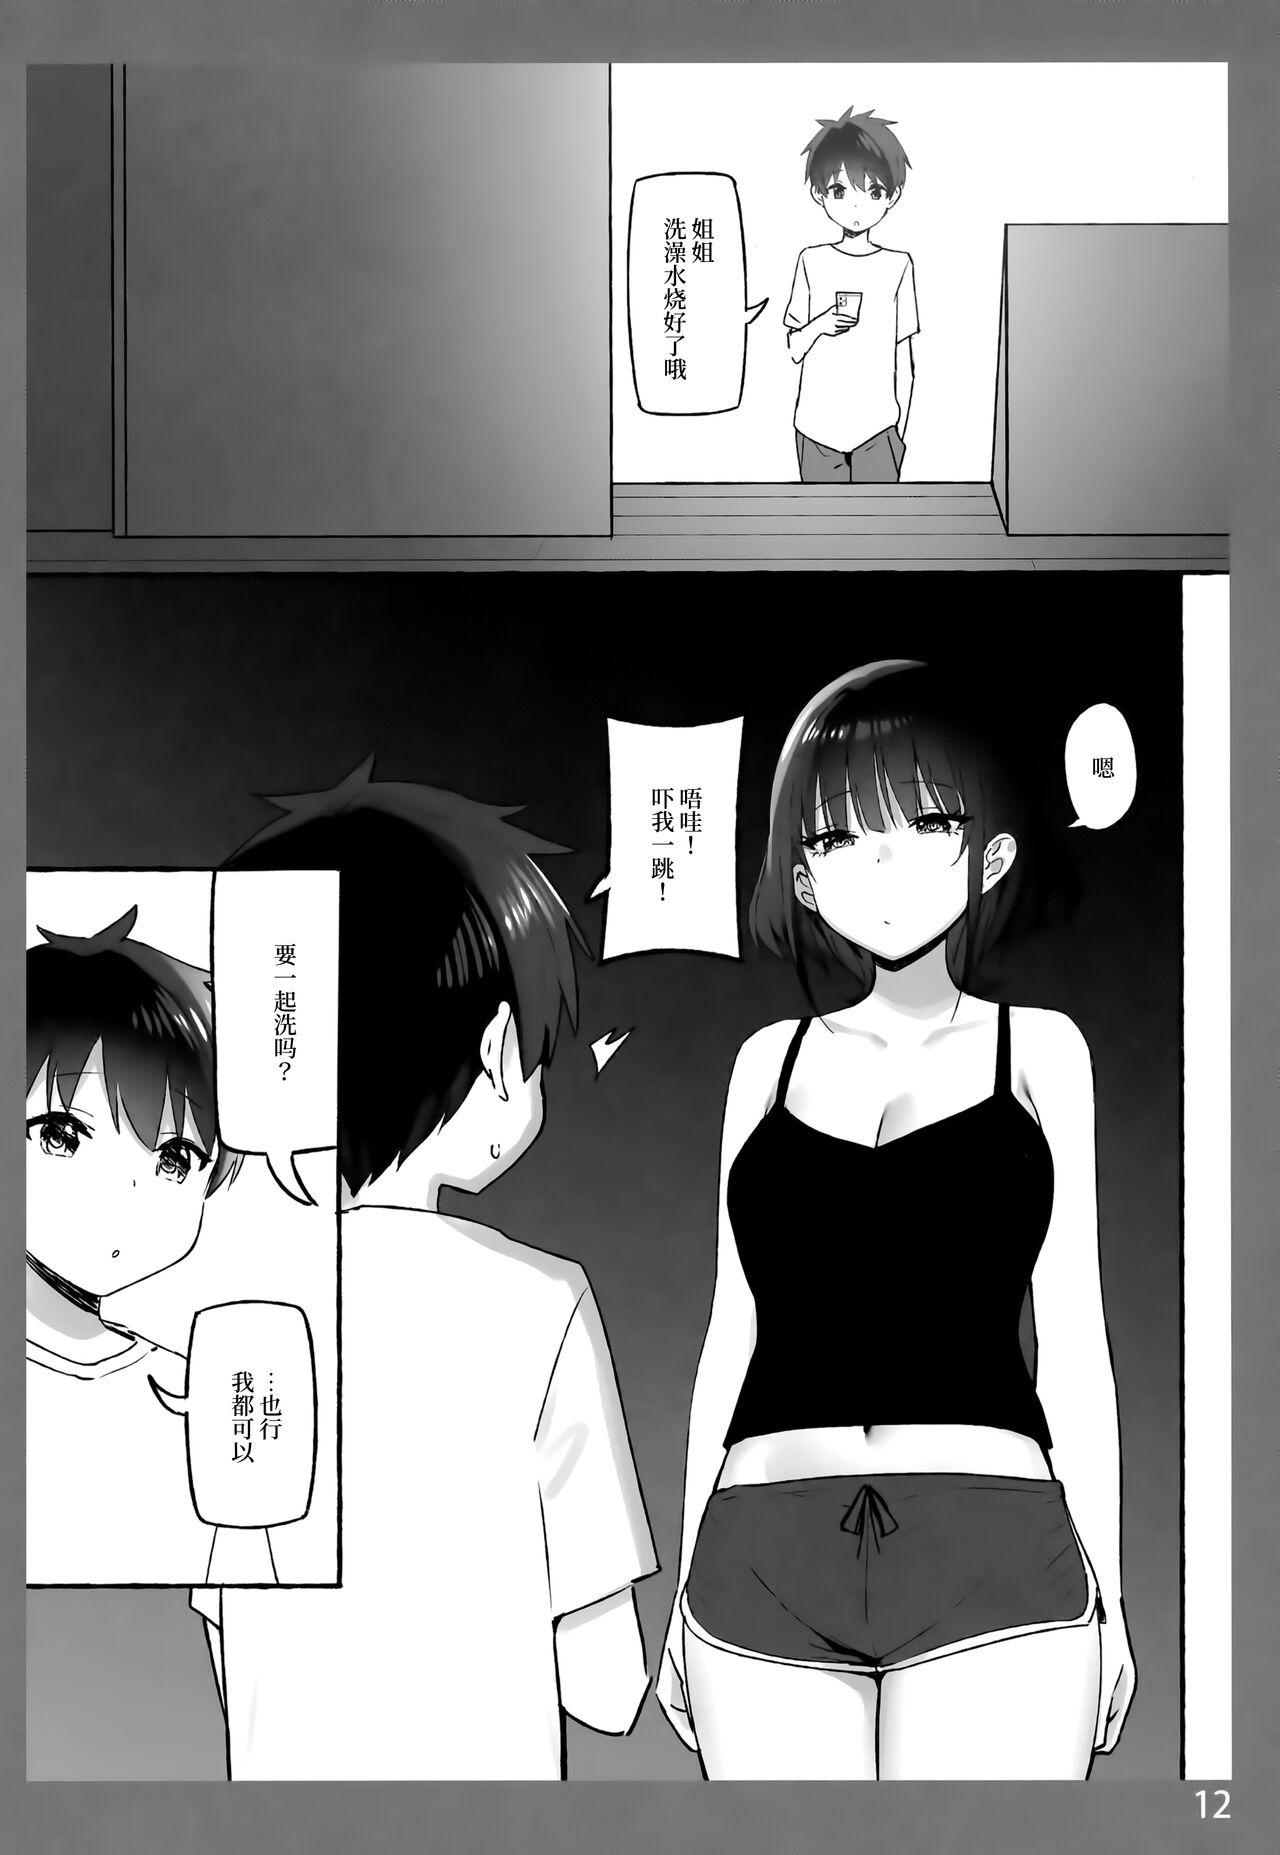 Tight Cunt [Candy Club (Sky)] Onee-chan to Torokeru Kimochi SP | The Melting Feeling with Onee-chan SP [Chinese] [白杨汉化组] - Original Highheels - Page 11